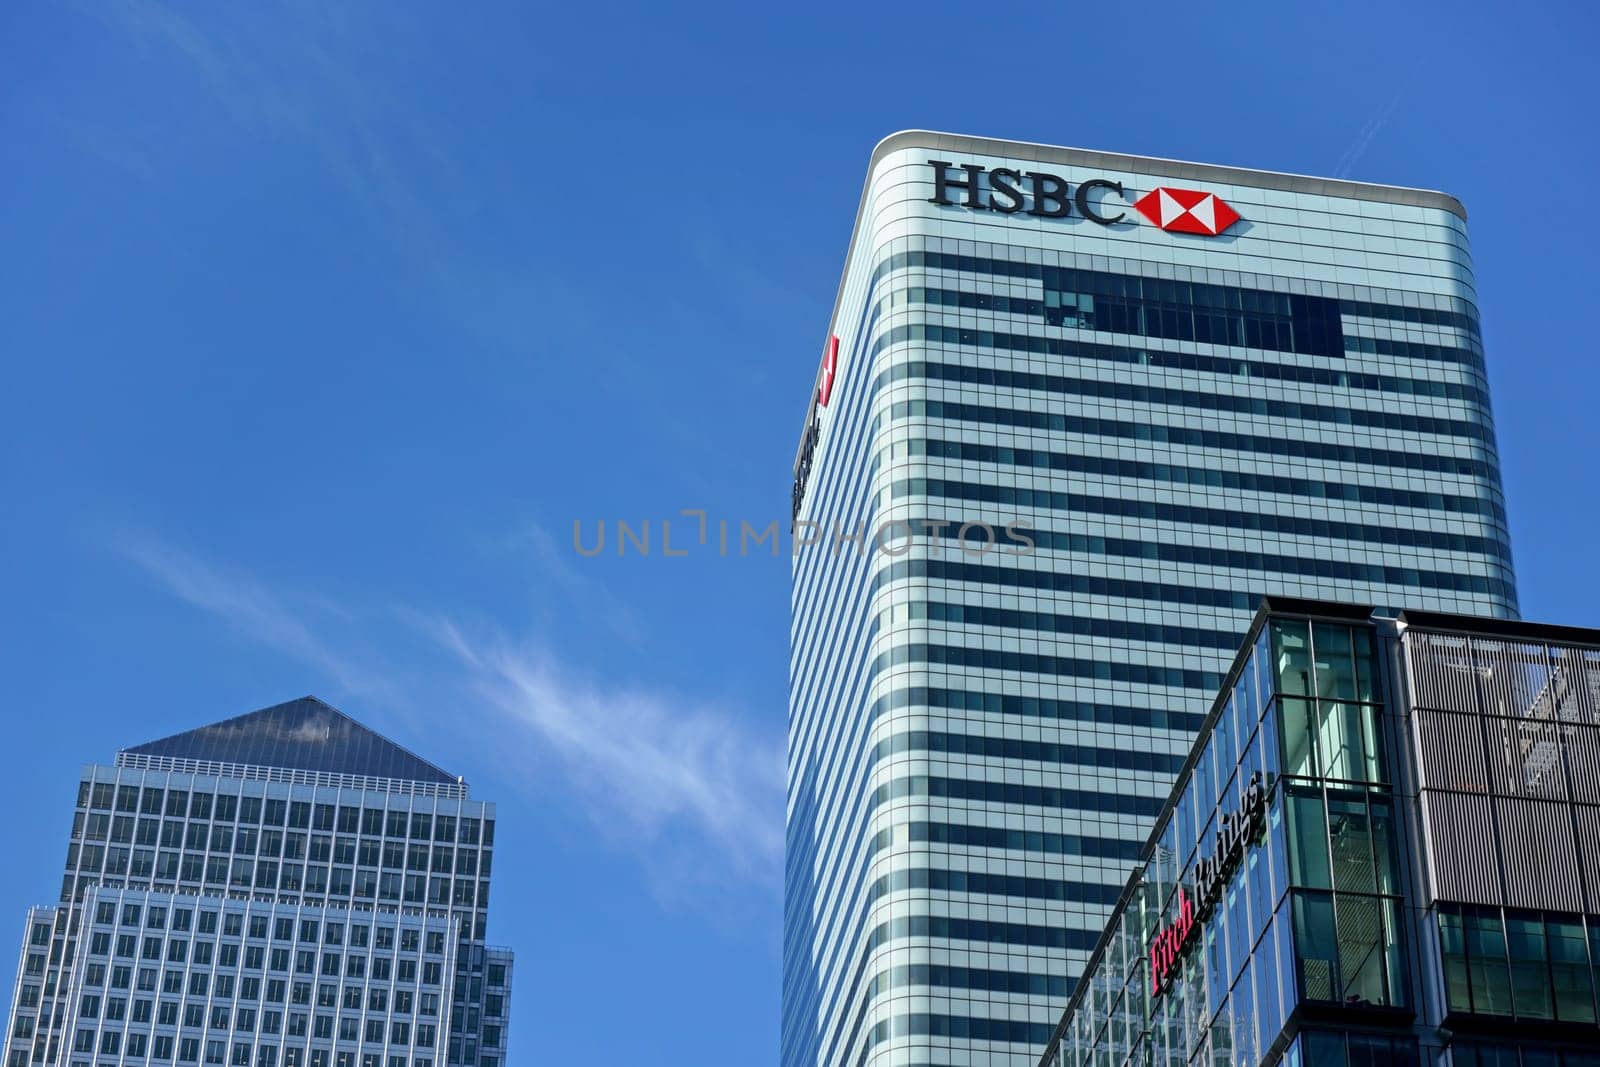 London, United Kingdom - February 03, 2019: Sun shines on world Headquarters of HSBC Holdings plc at 8 Canada Square, Canary Wharf. It's 7th largest bank worldwide and was established in 1865 by Ivanko